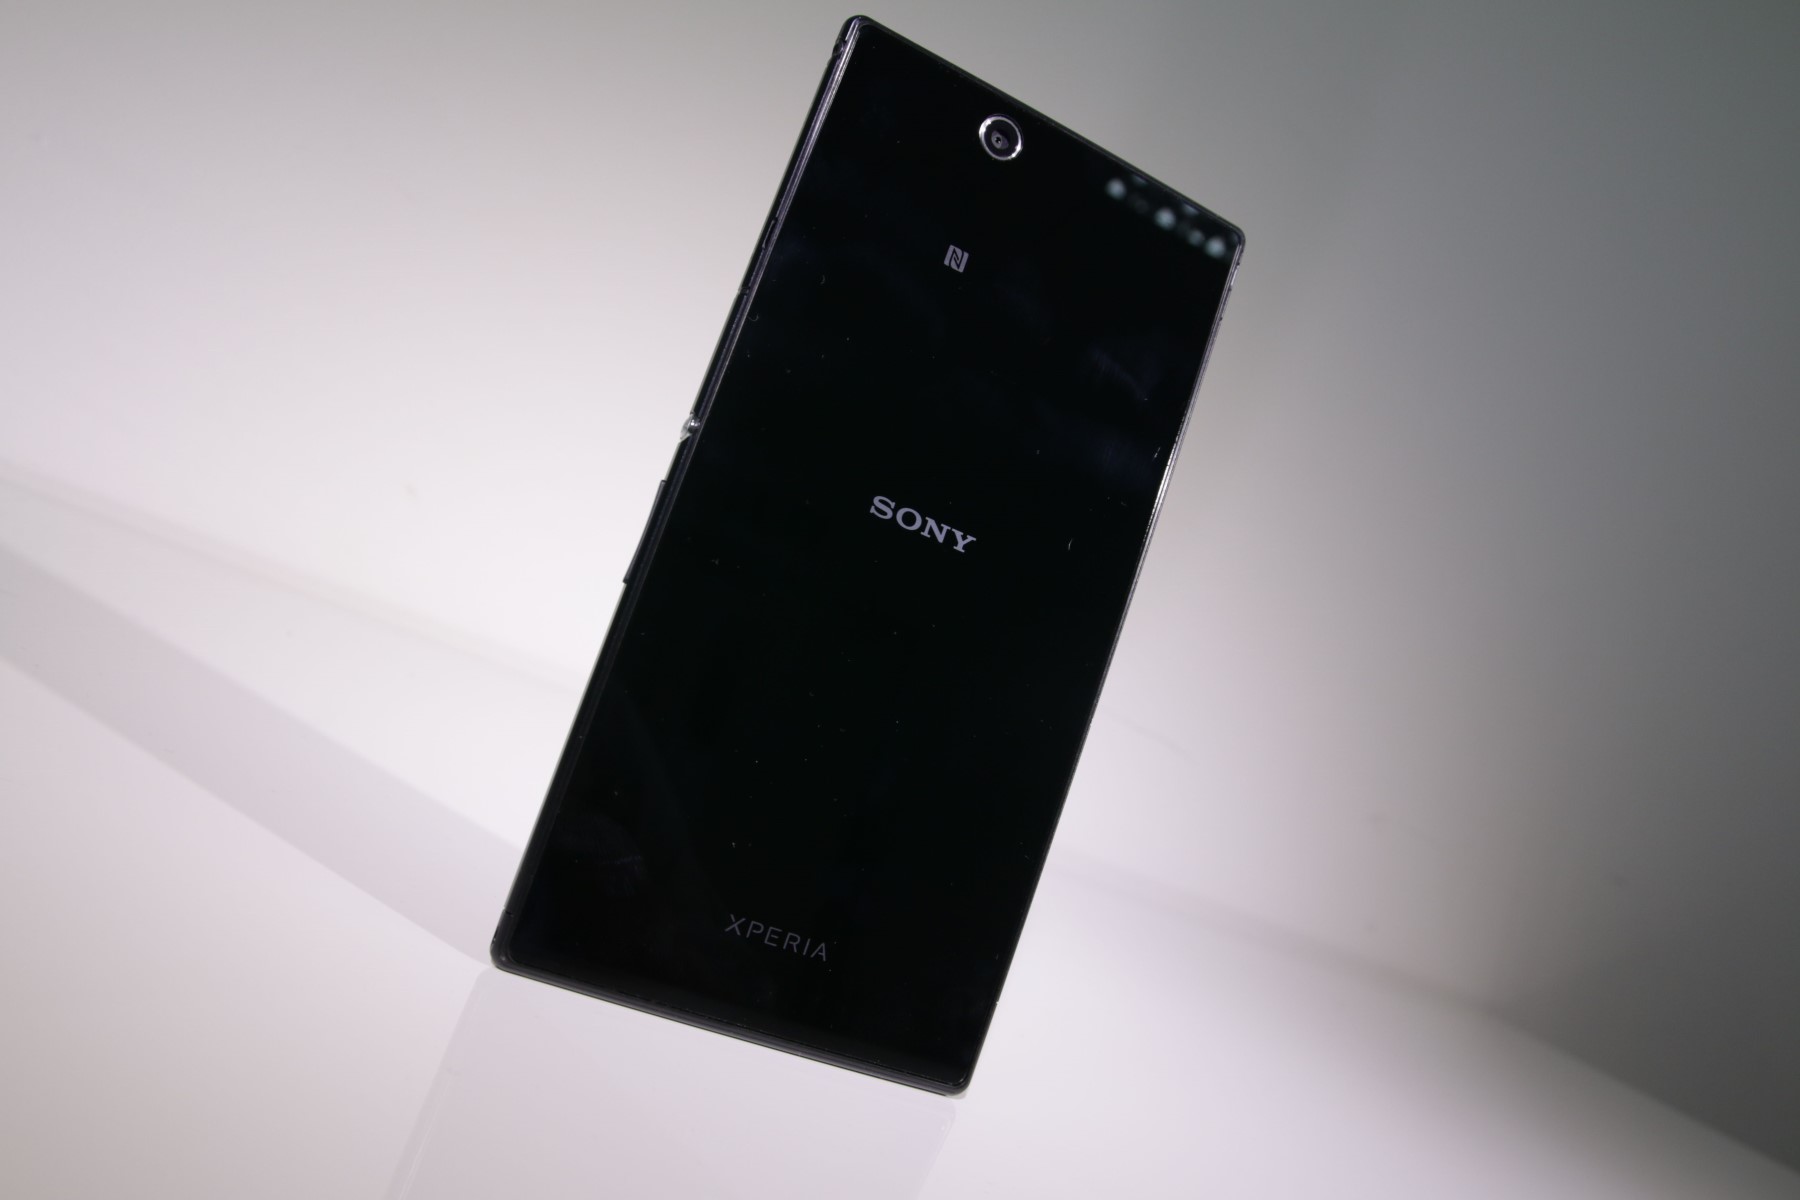 Xperia Z Video Call Guide: Step-by-Step Instructions